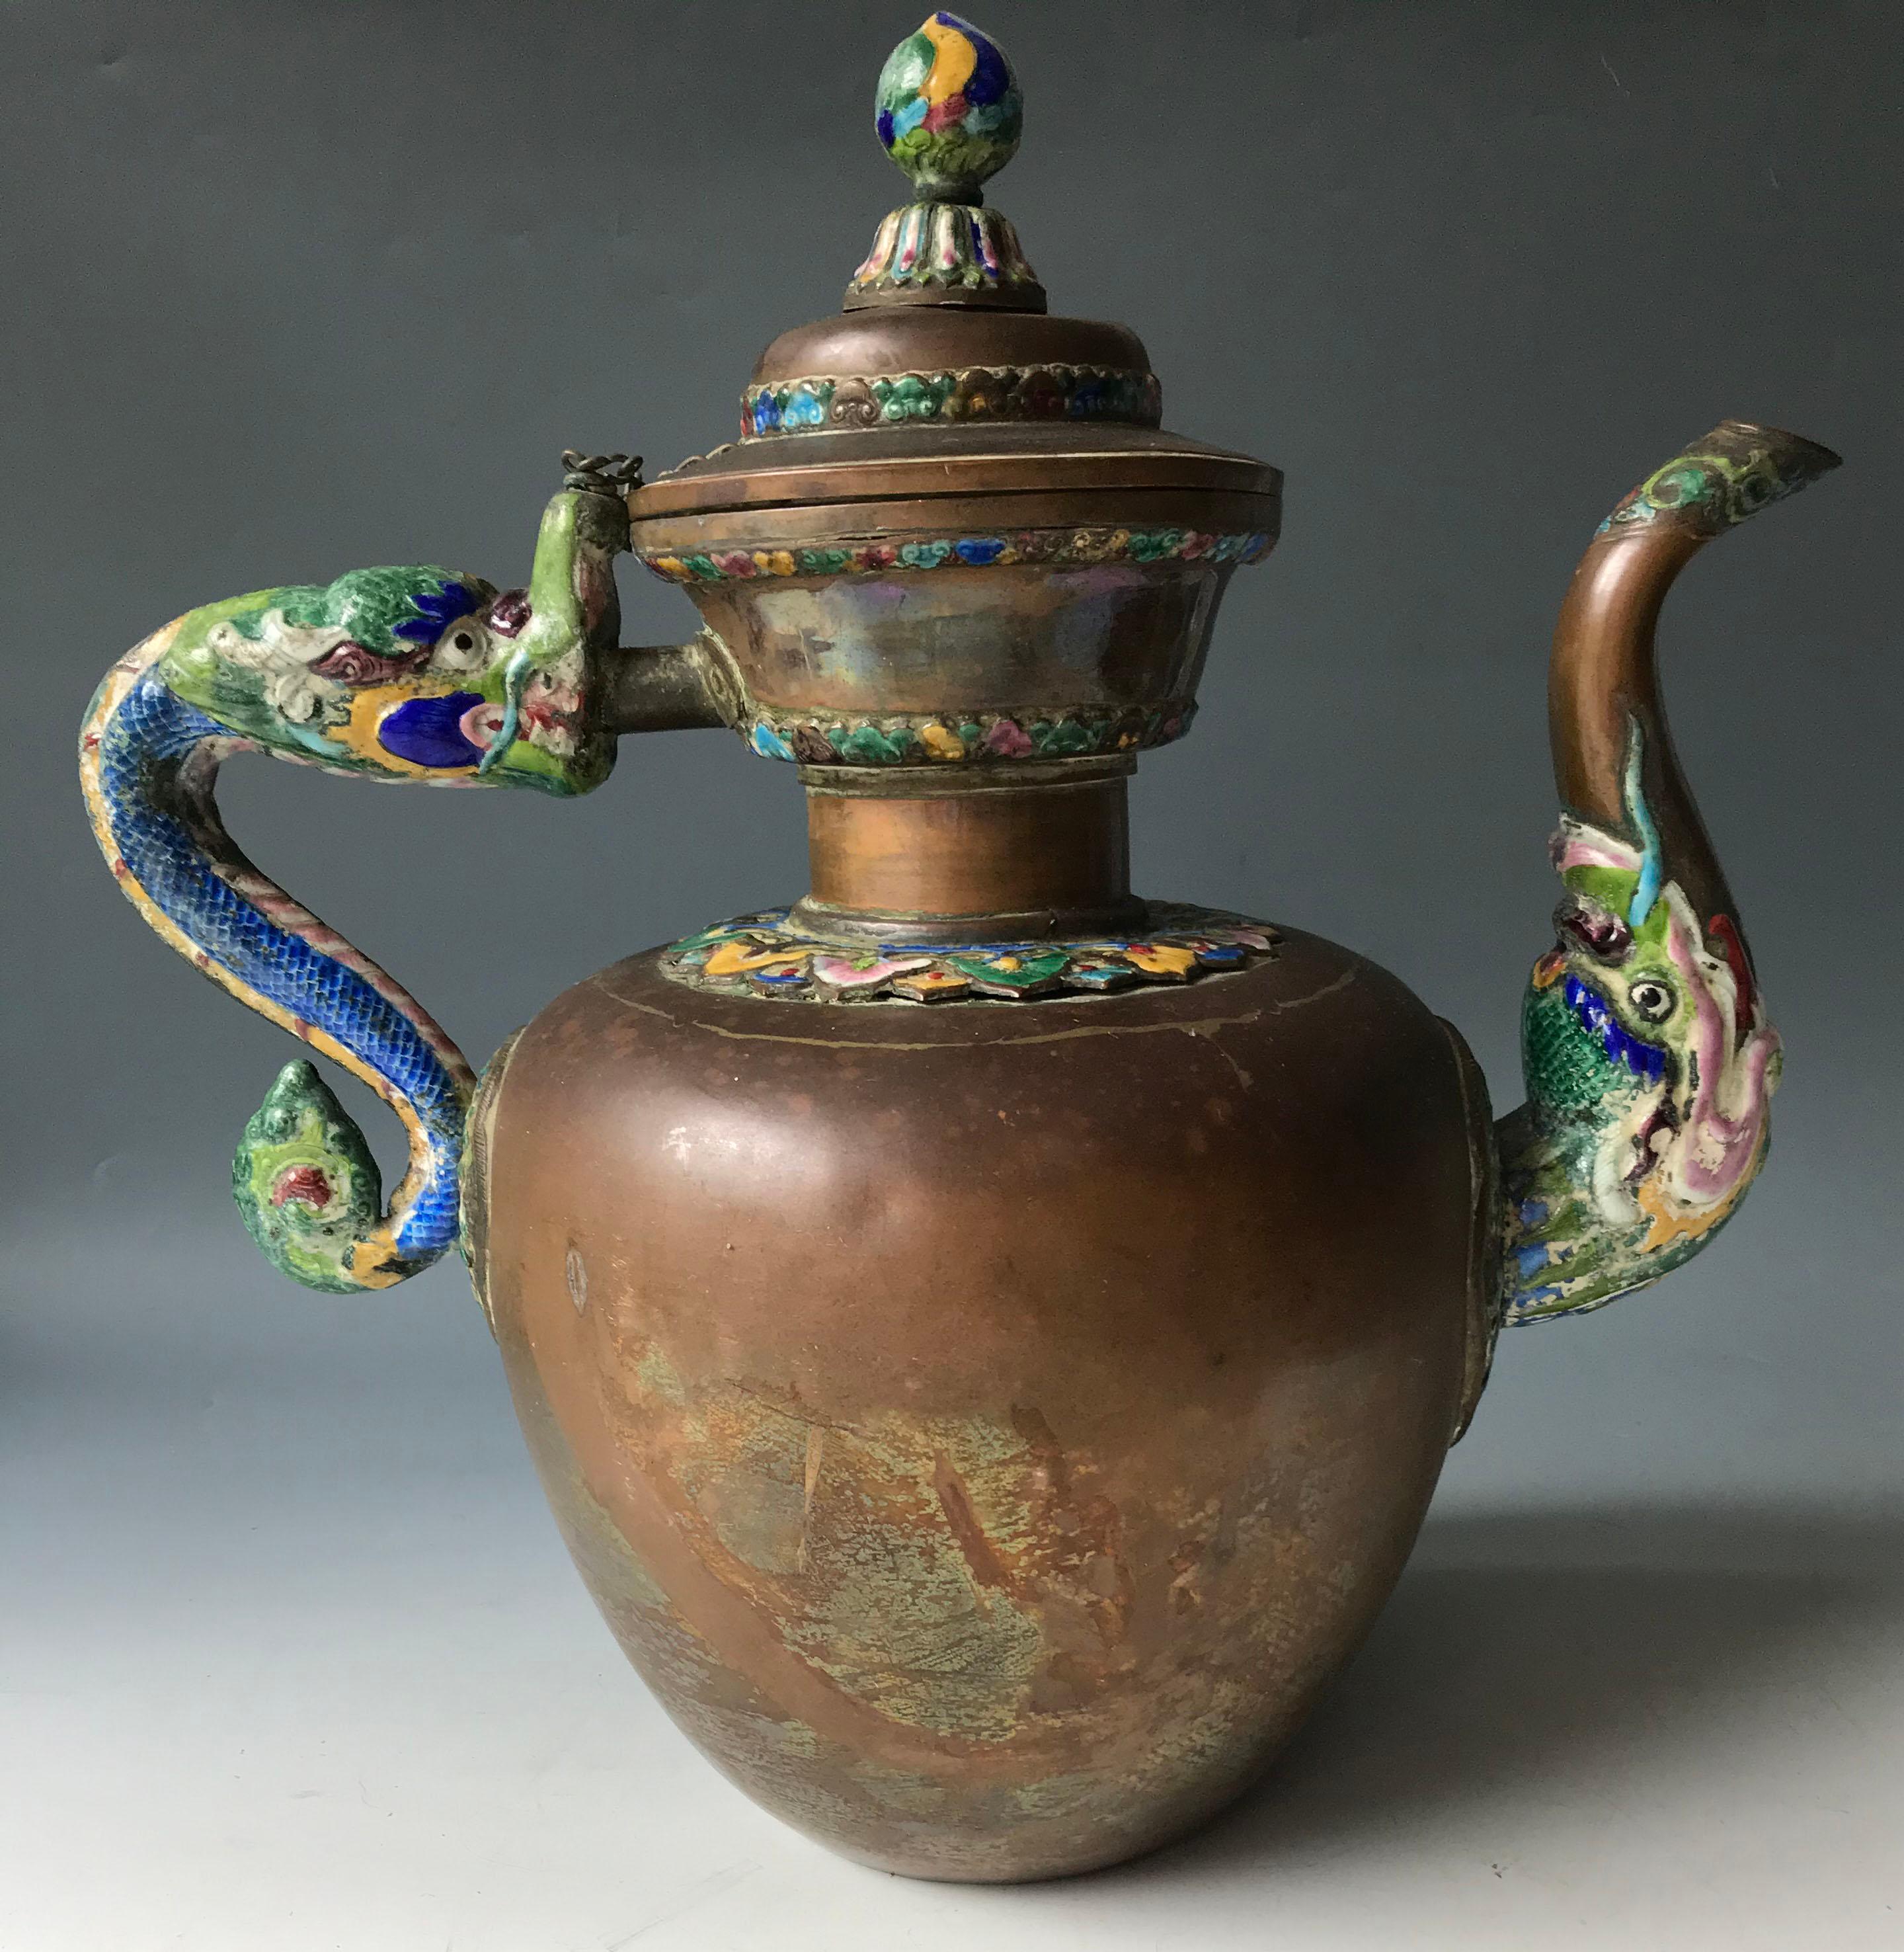 A Mongolian-Chinese copper brass Enamel teapot Circa /19th century
A fine rare Large handsome teapot of bulbous form with colourful enamelled dragon handle and spout and enamelling on body and lid
Period: 18th early 19th century
Measure: H 35